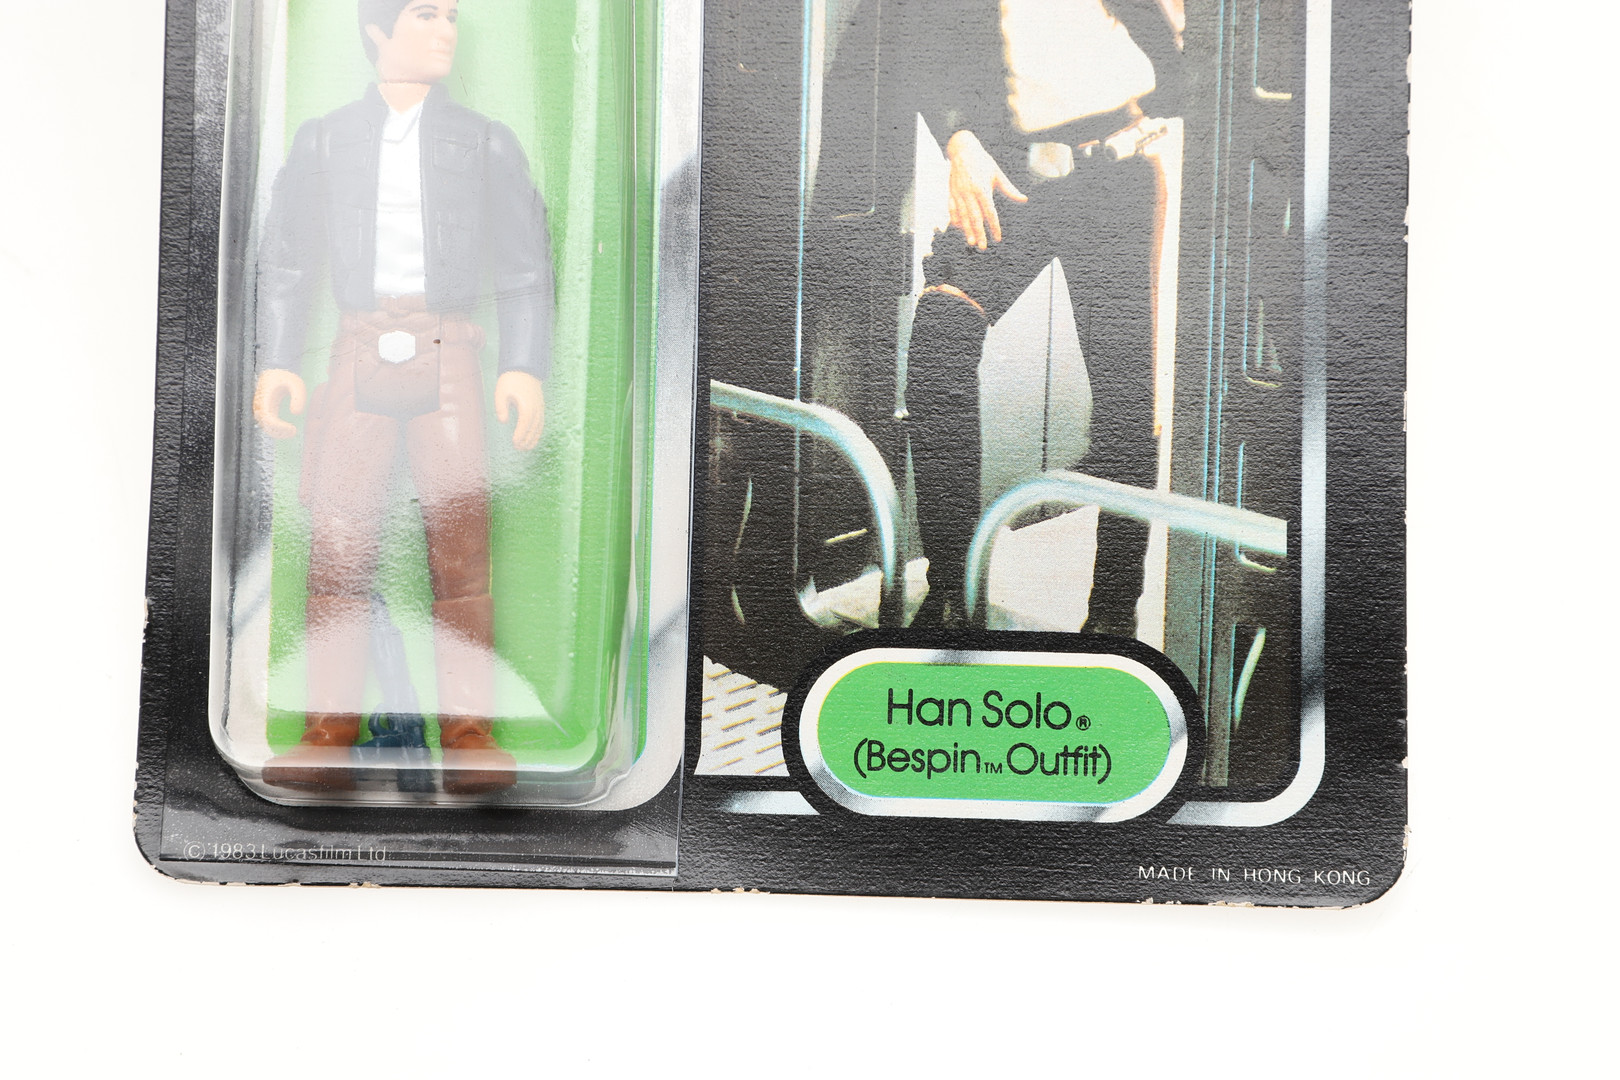 STAR WARS CARDED FIGURES BY PALITOY - HAN SOLO & PRINCESS LEIA. - Image 4 of 18